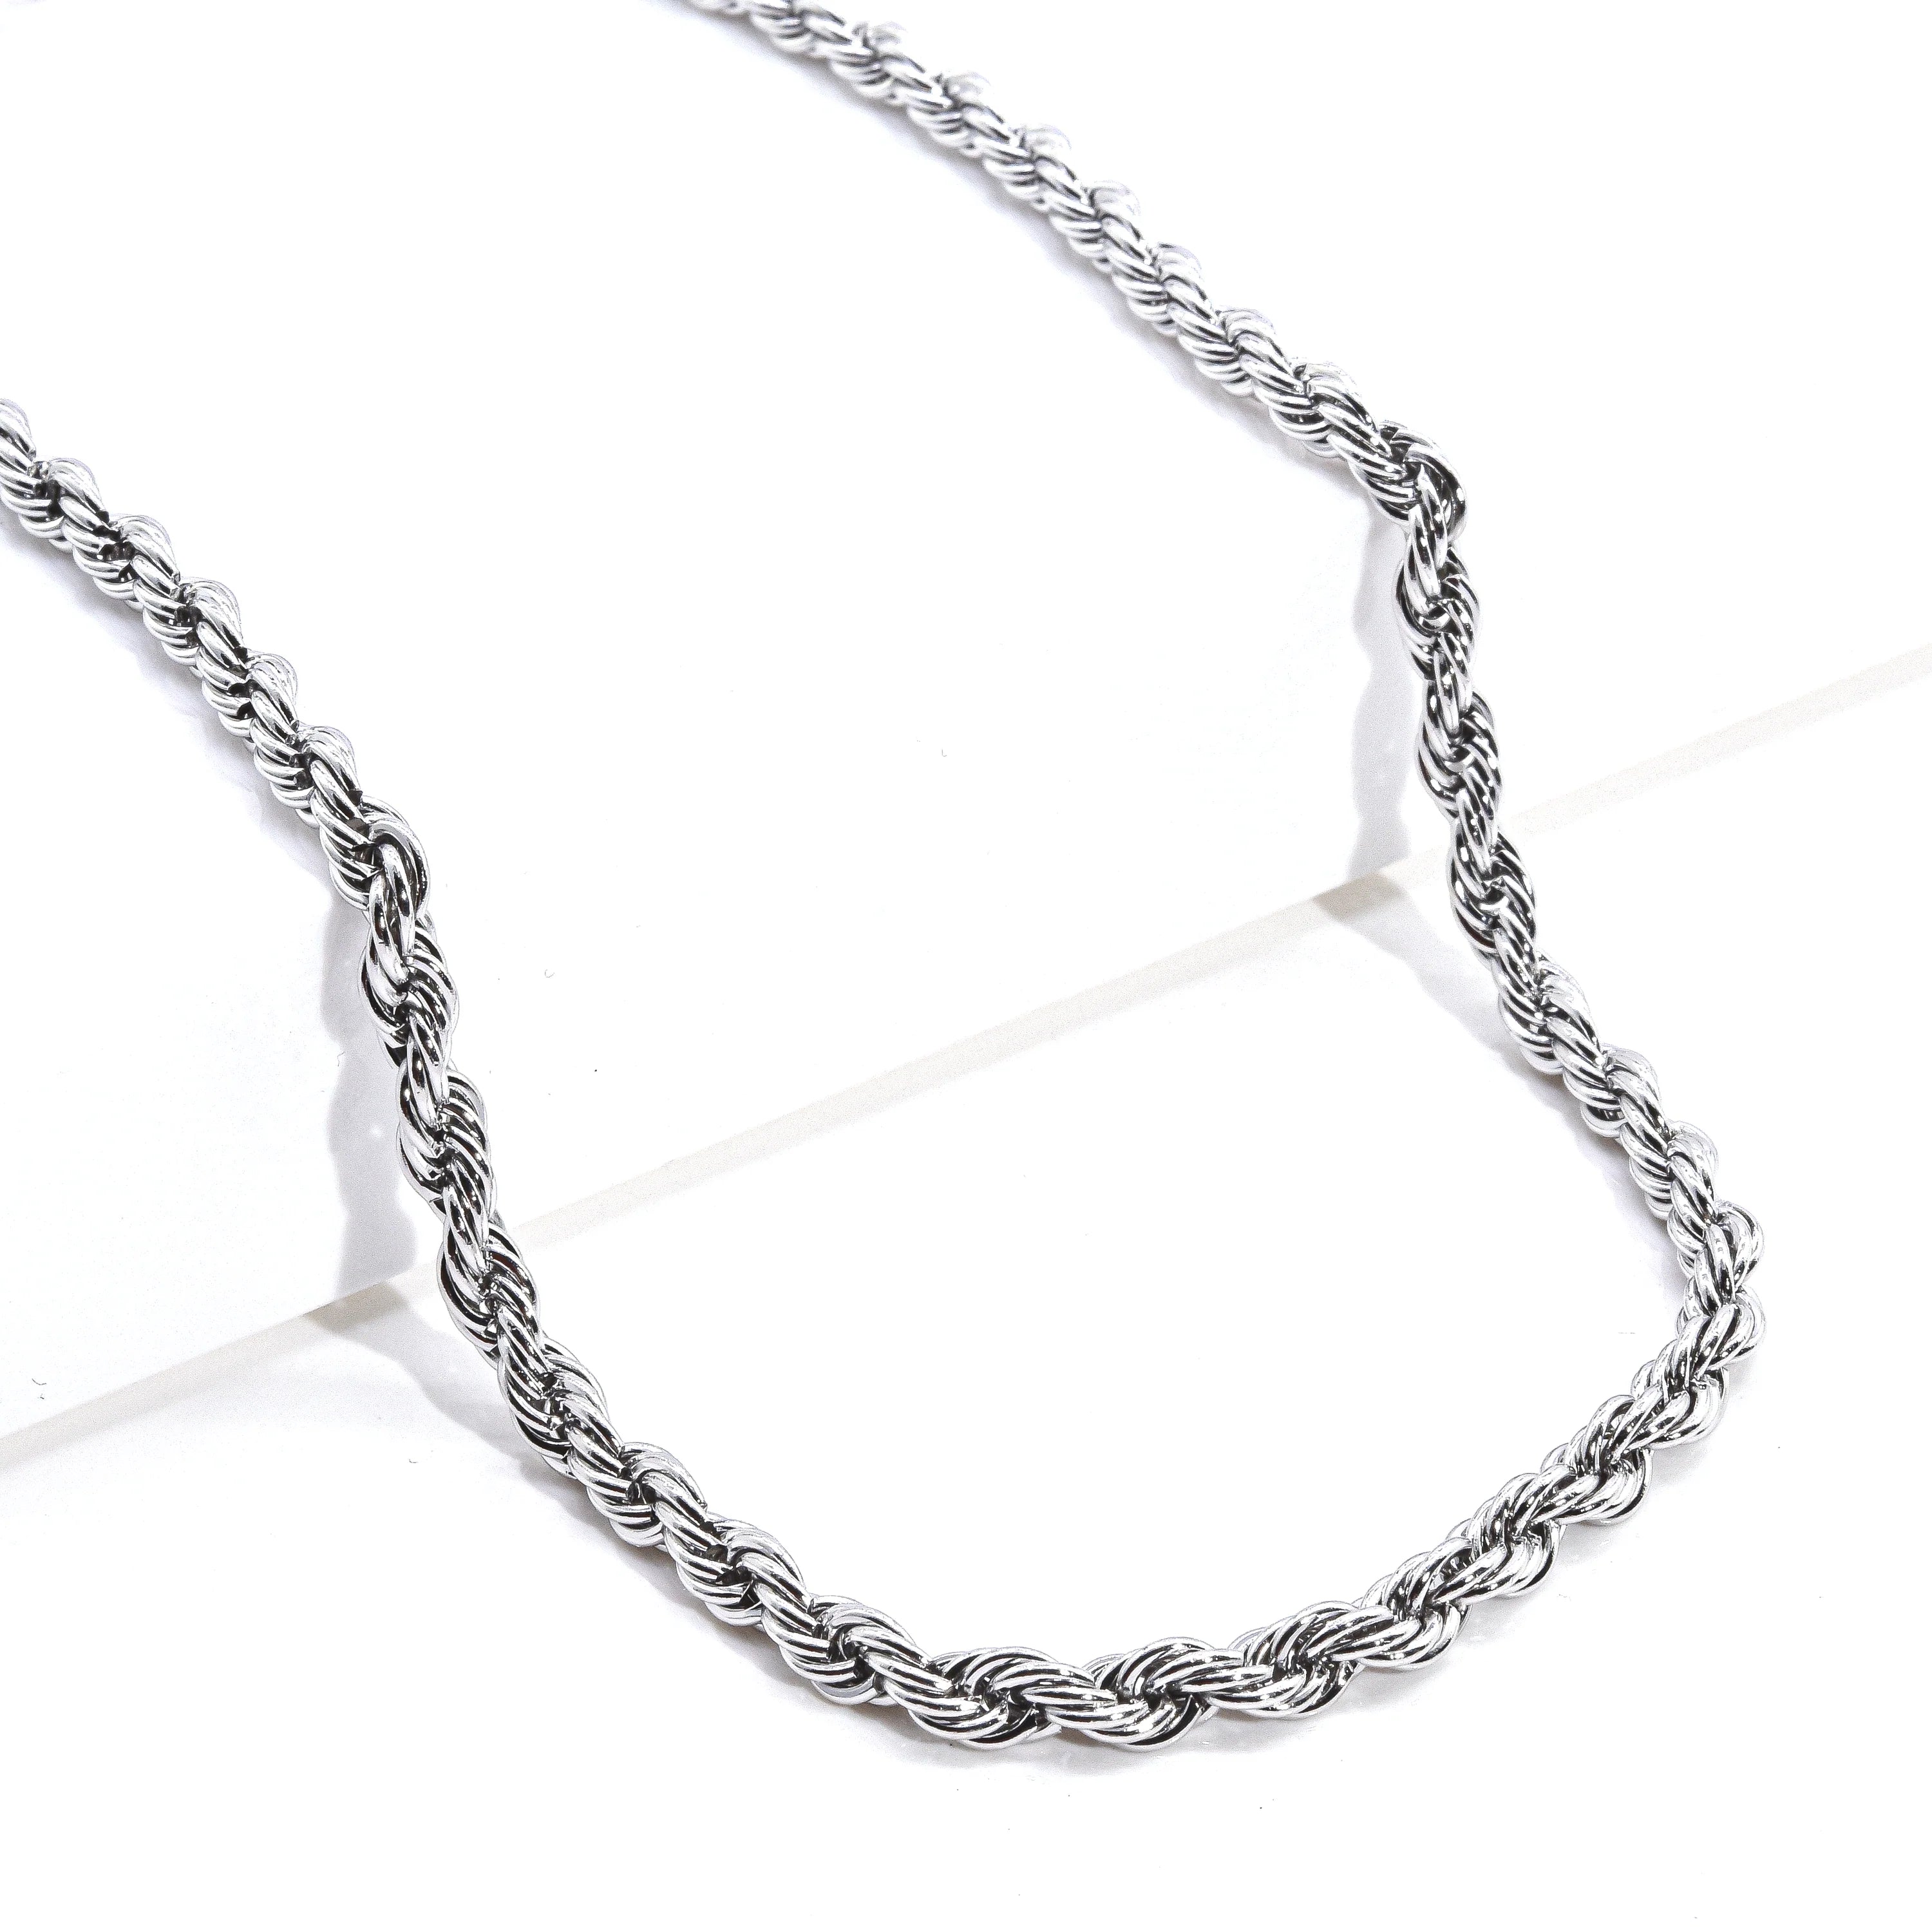 Solei Rope Chain Necklace